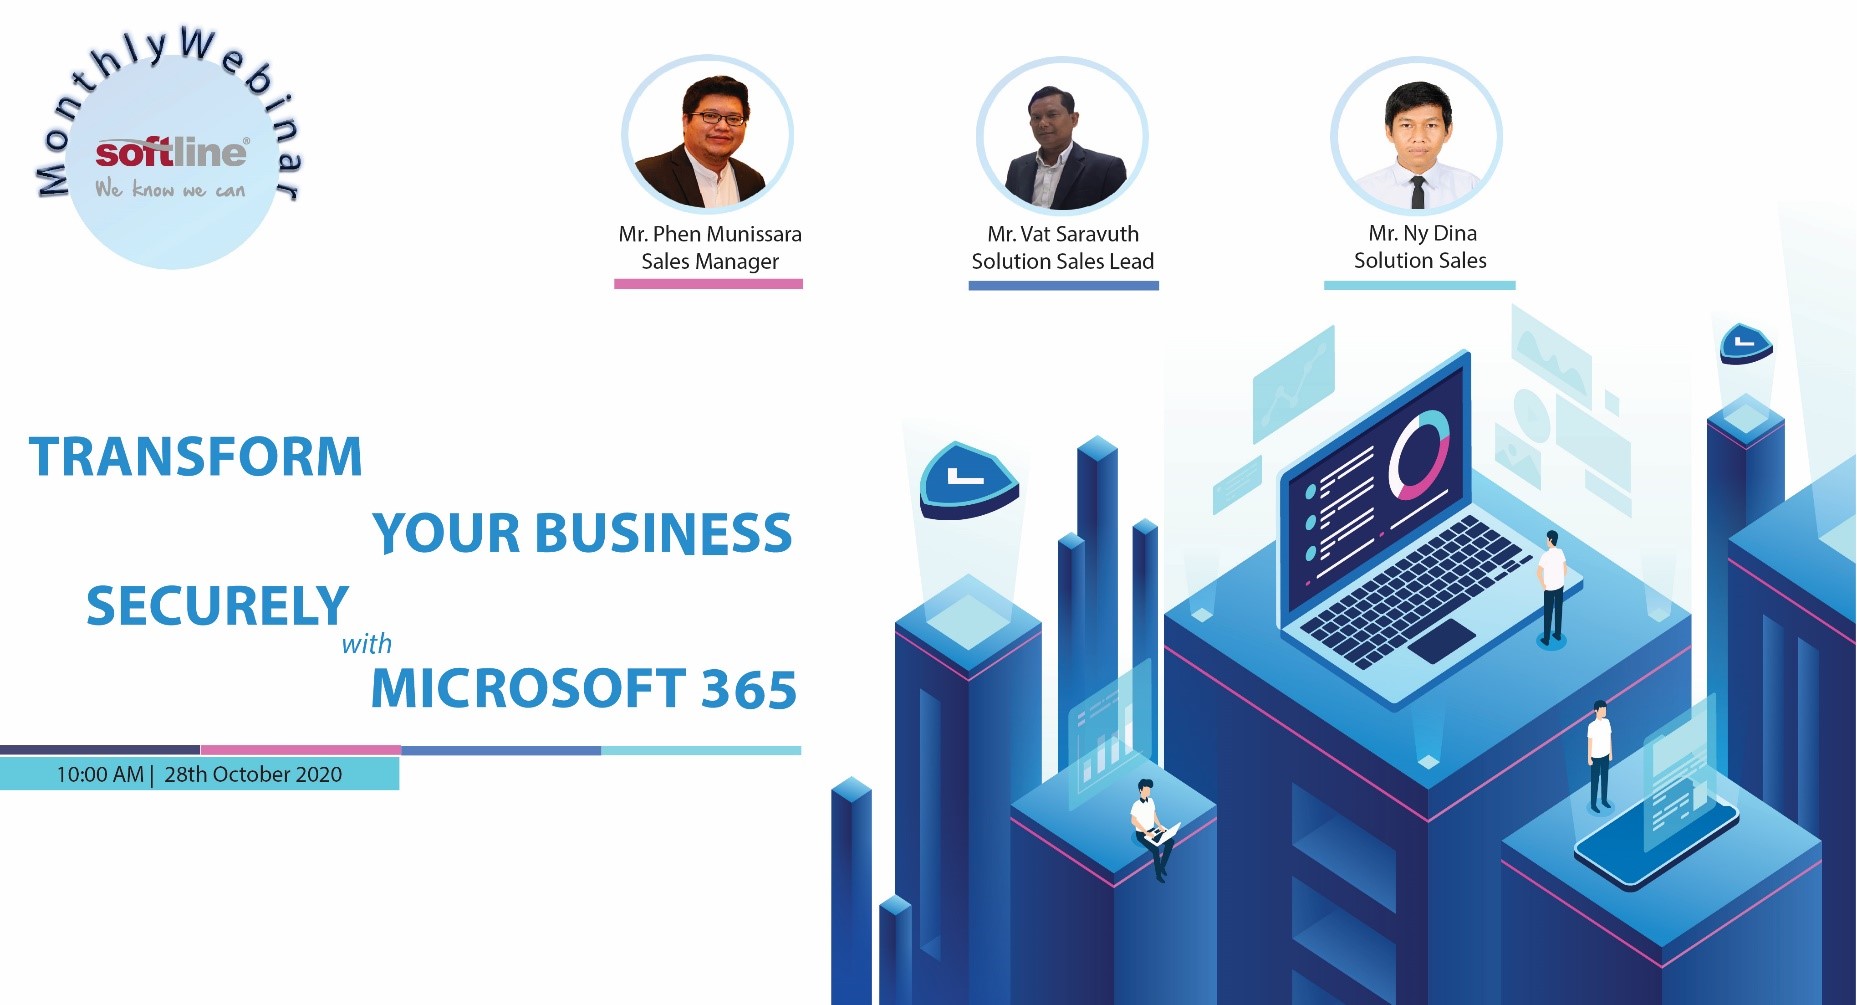 TRANSFORM YOUR BUSINESS SECURELY WITH MICROSOFT 365